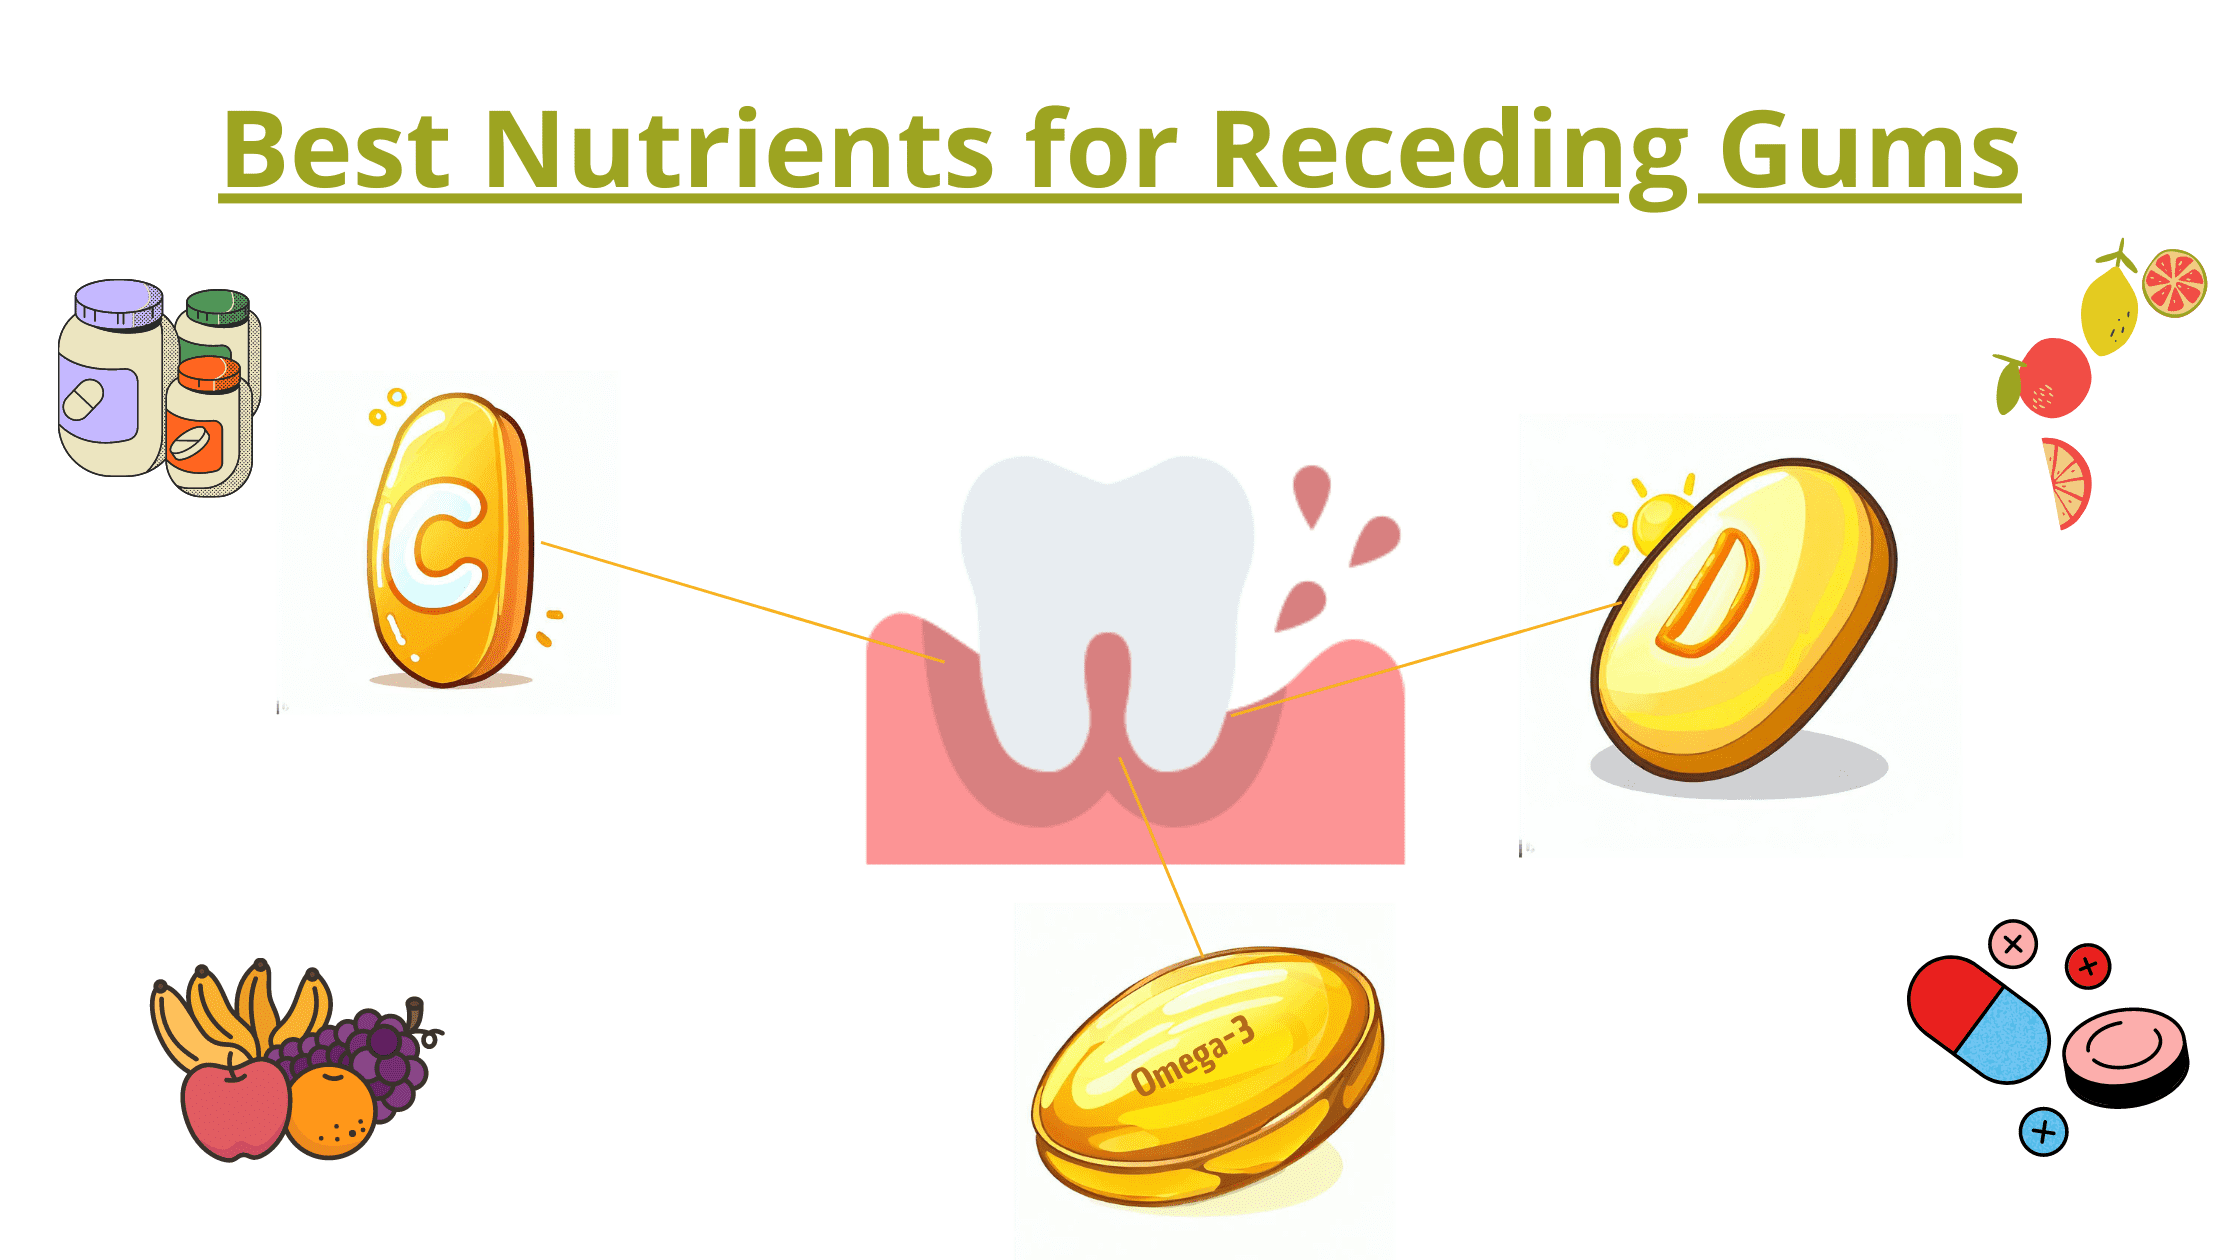 Essential nutrients for gum health